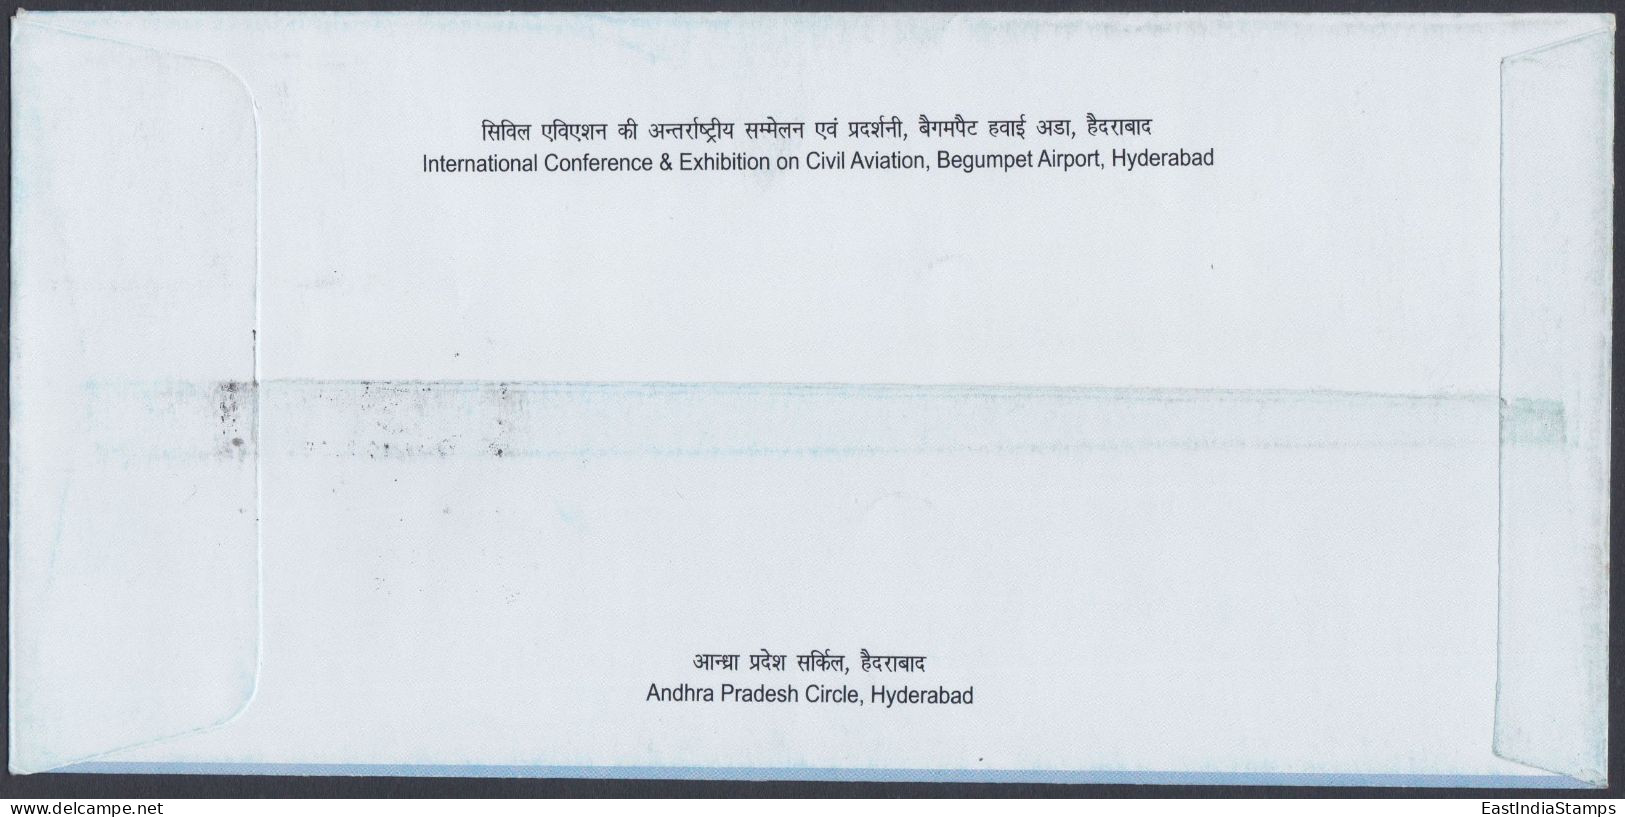 Inde India 2008 Special Cover Aviation, Aeroplane, Aircraft, Airplane, Jet, Airport, Pictorial Postmark - Briefe U. Dokumente